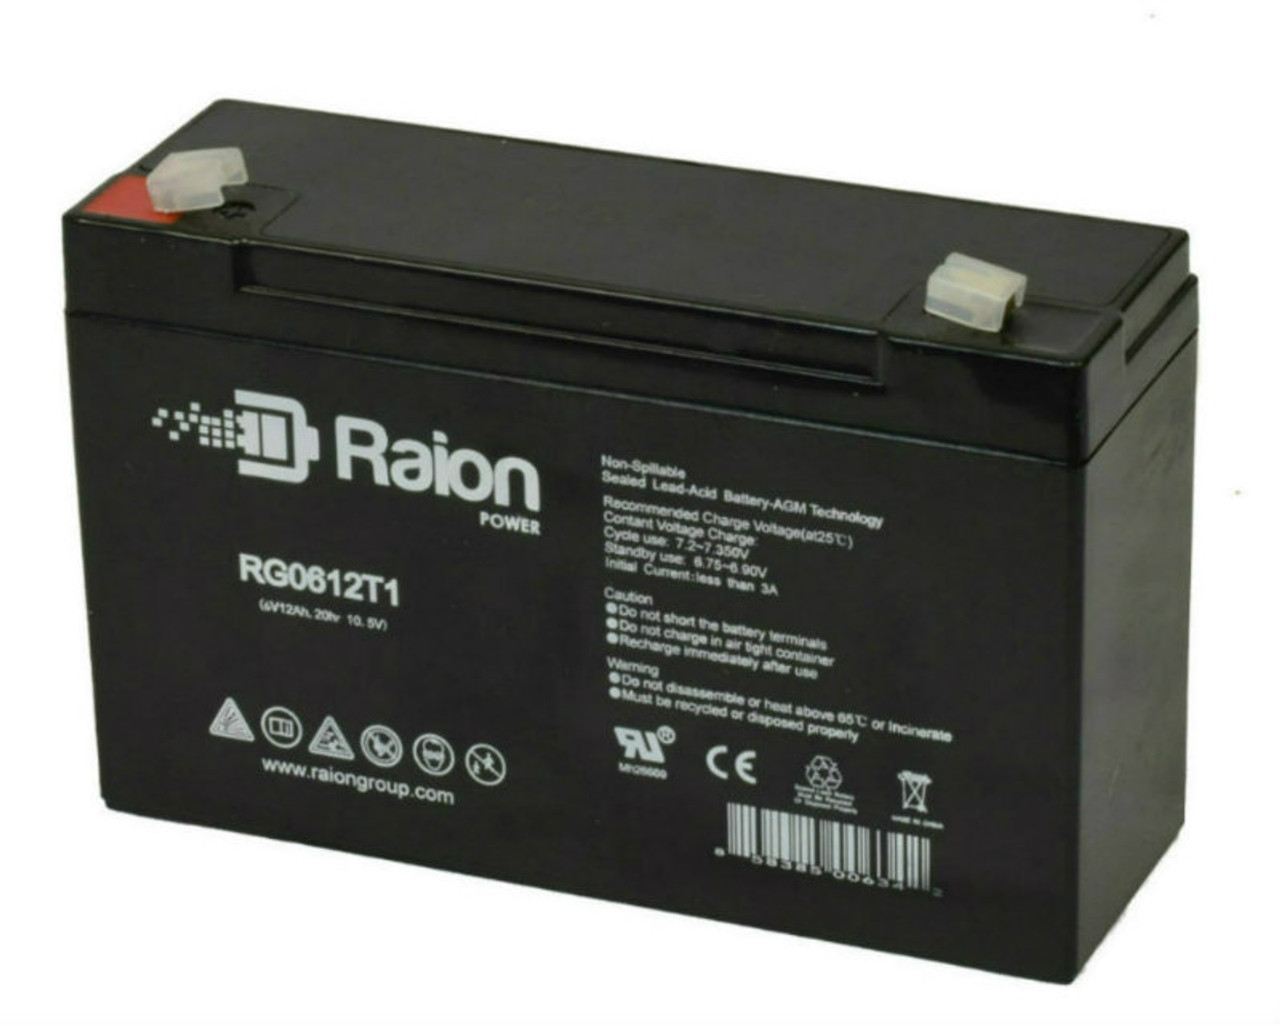 Raion Power RG06120T1 Replacement Emergency Light Battery for High-Lites 39-03